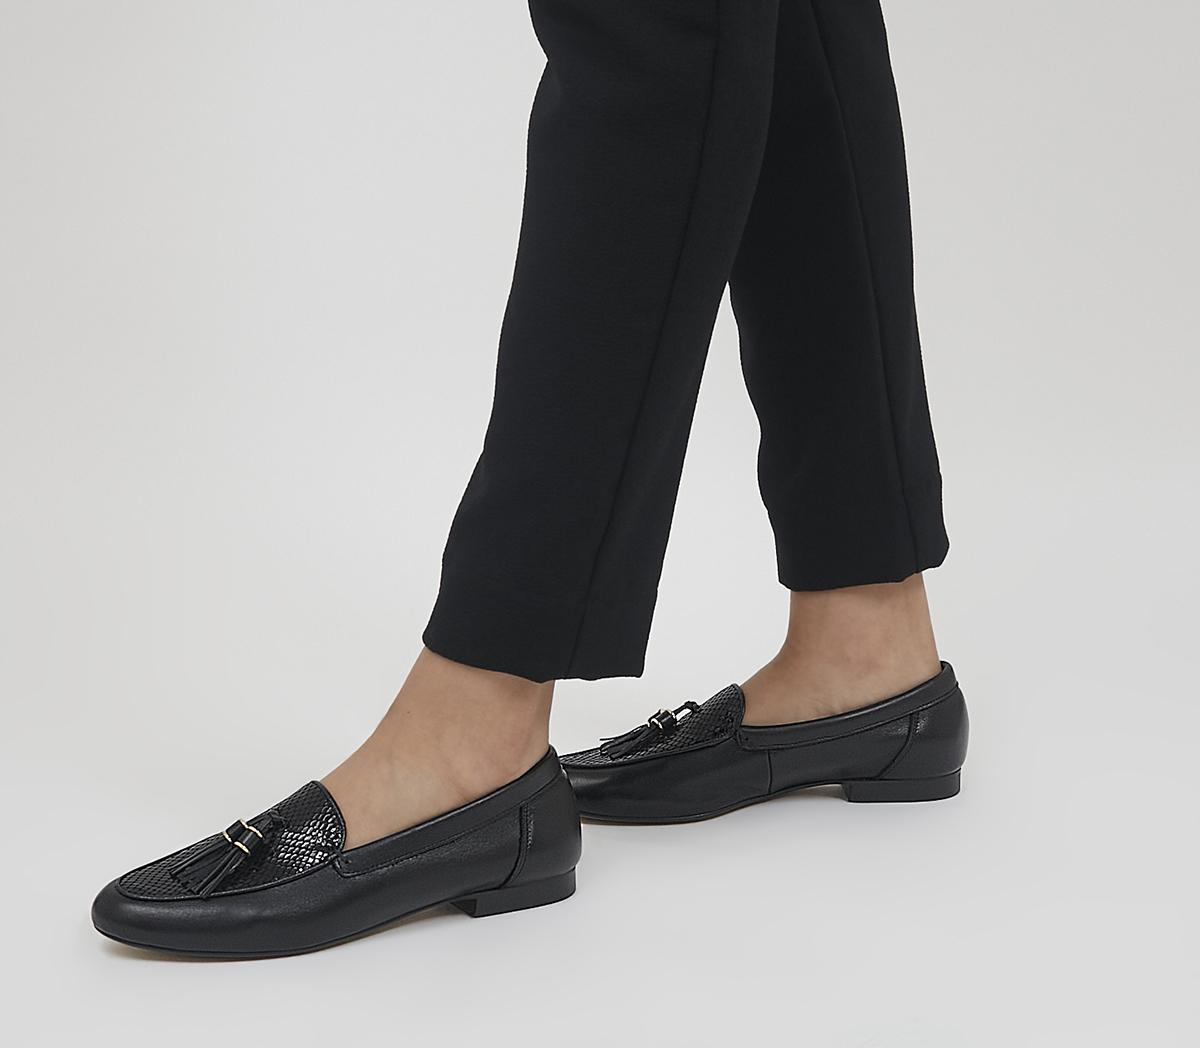 Womens Office Retro Tassel Loafers Black Leather Suede Mix Flats 